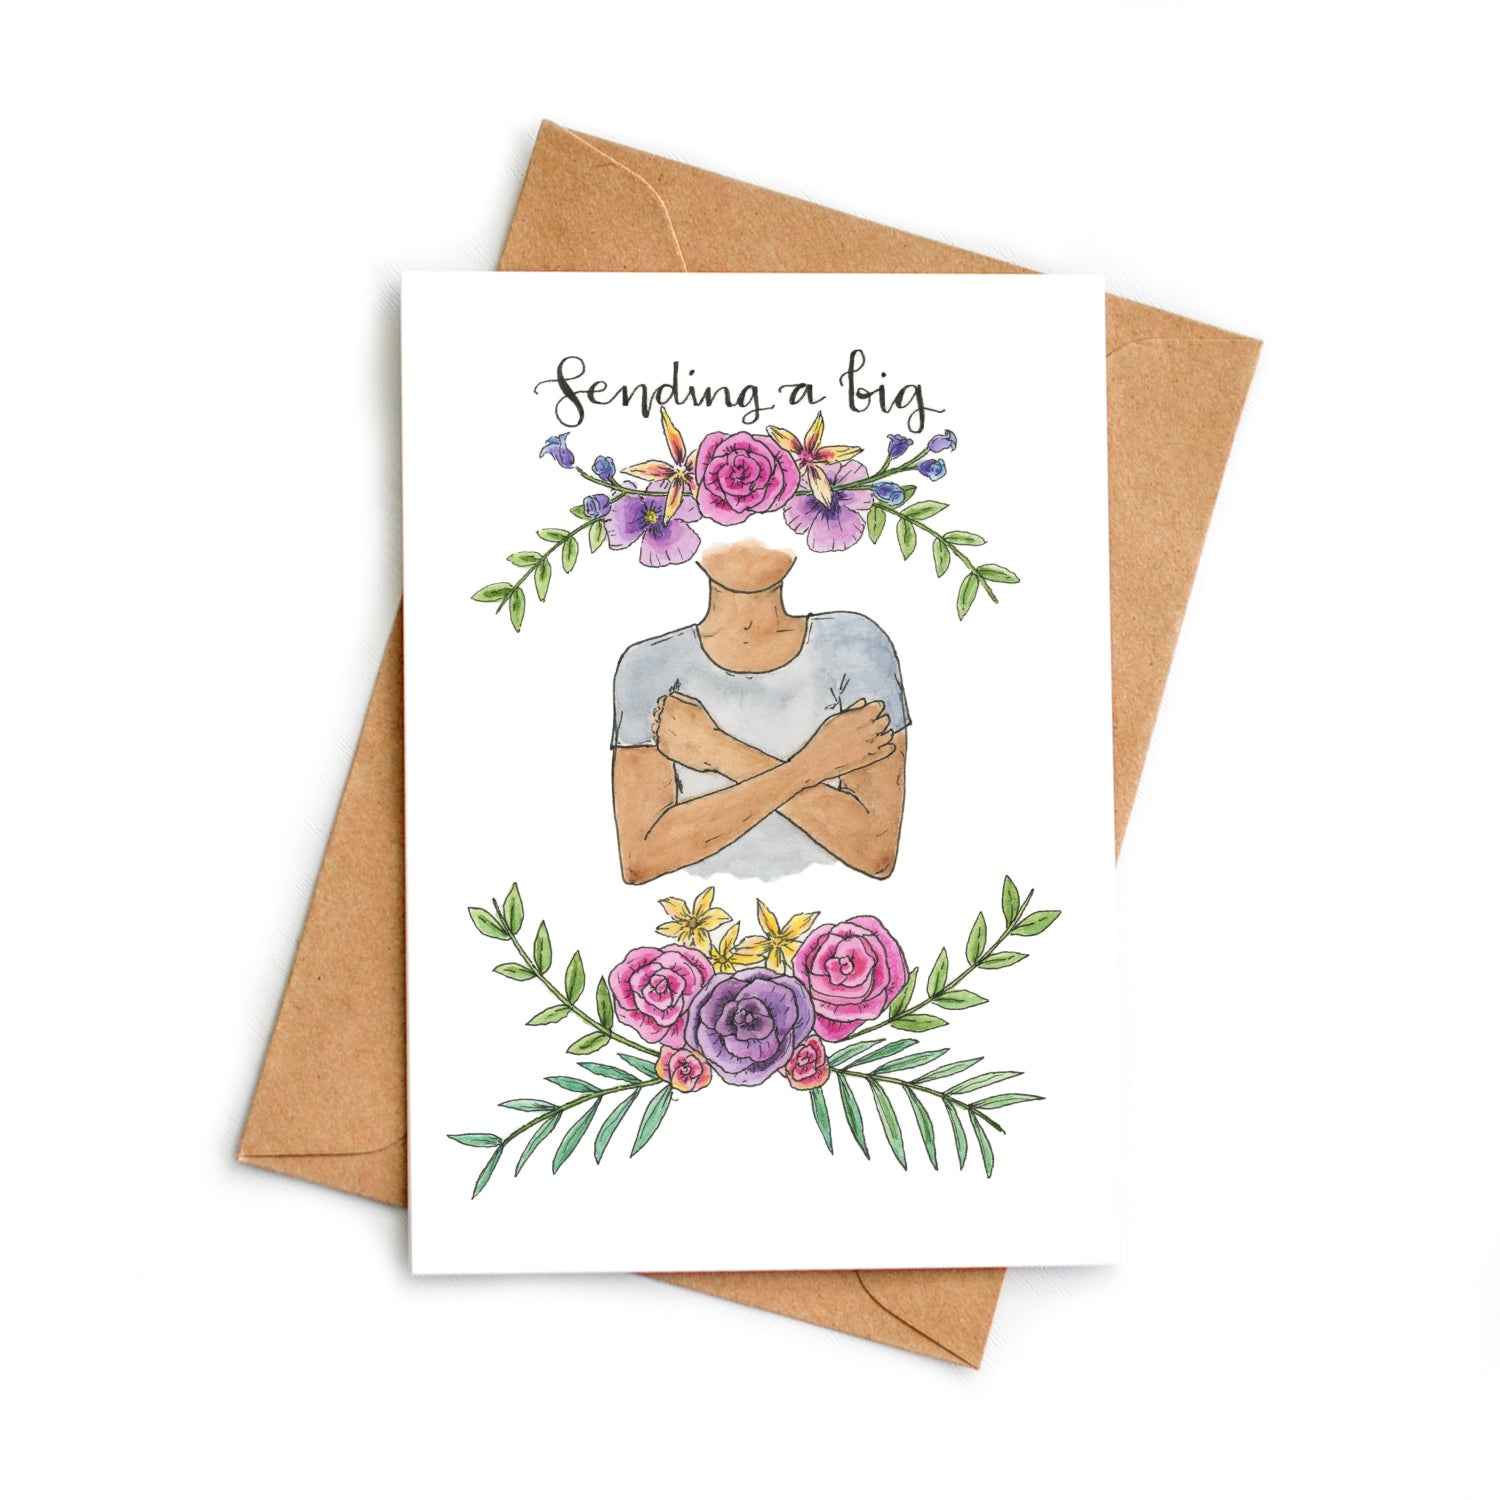 Greeting card with pink and purple flowers, with the American Sign Language symbol for hug. The person depicted has a dark skin tone. The words, "Sending a big" is hand-lettered at the top.